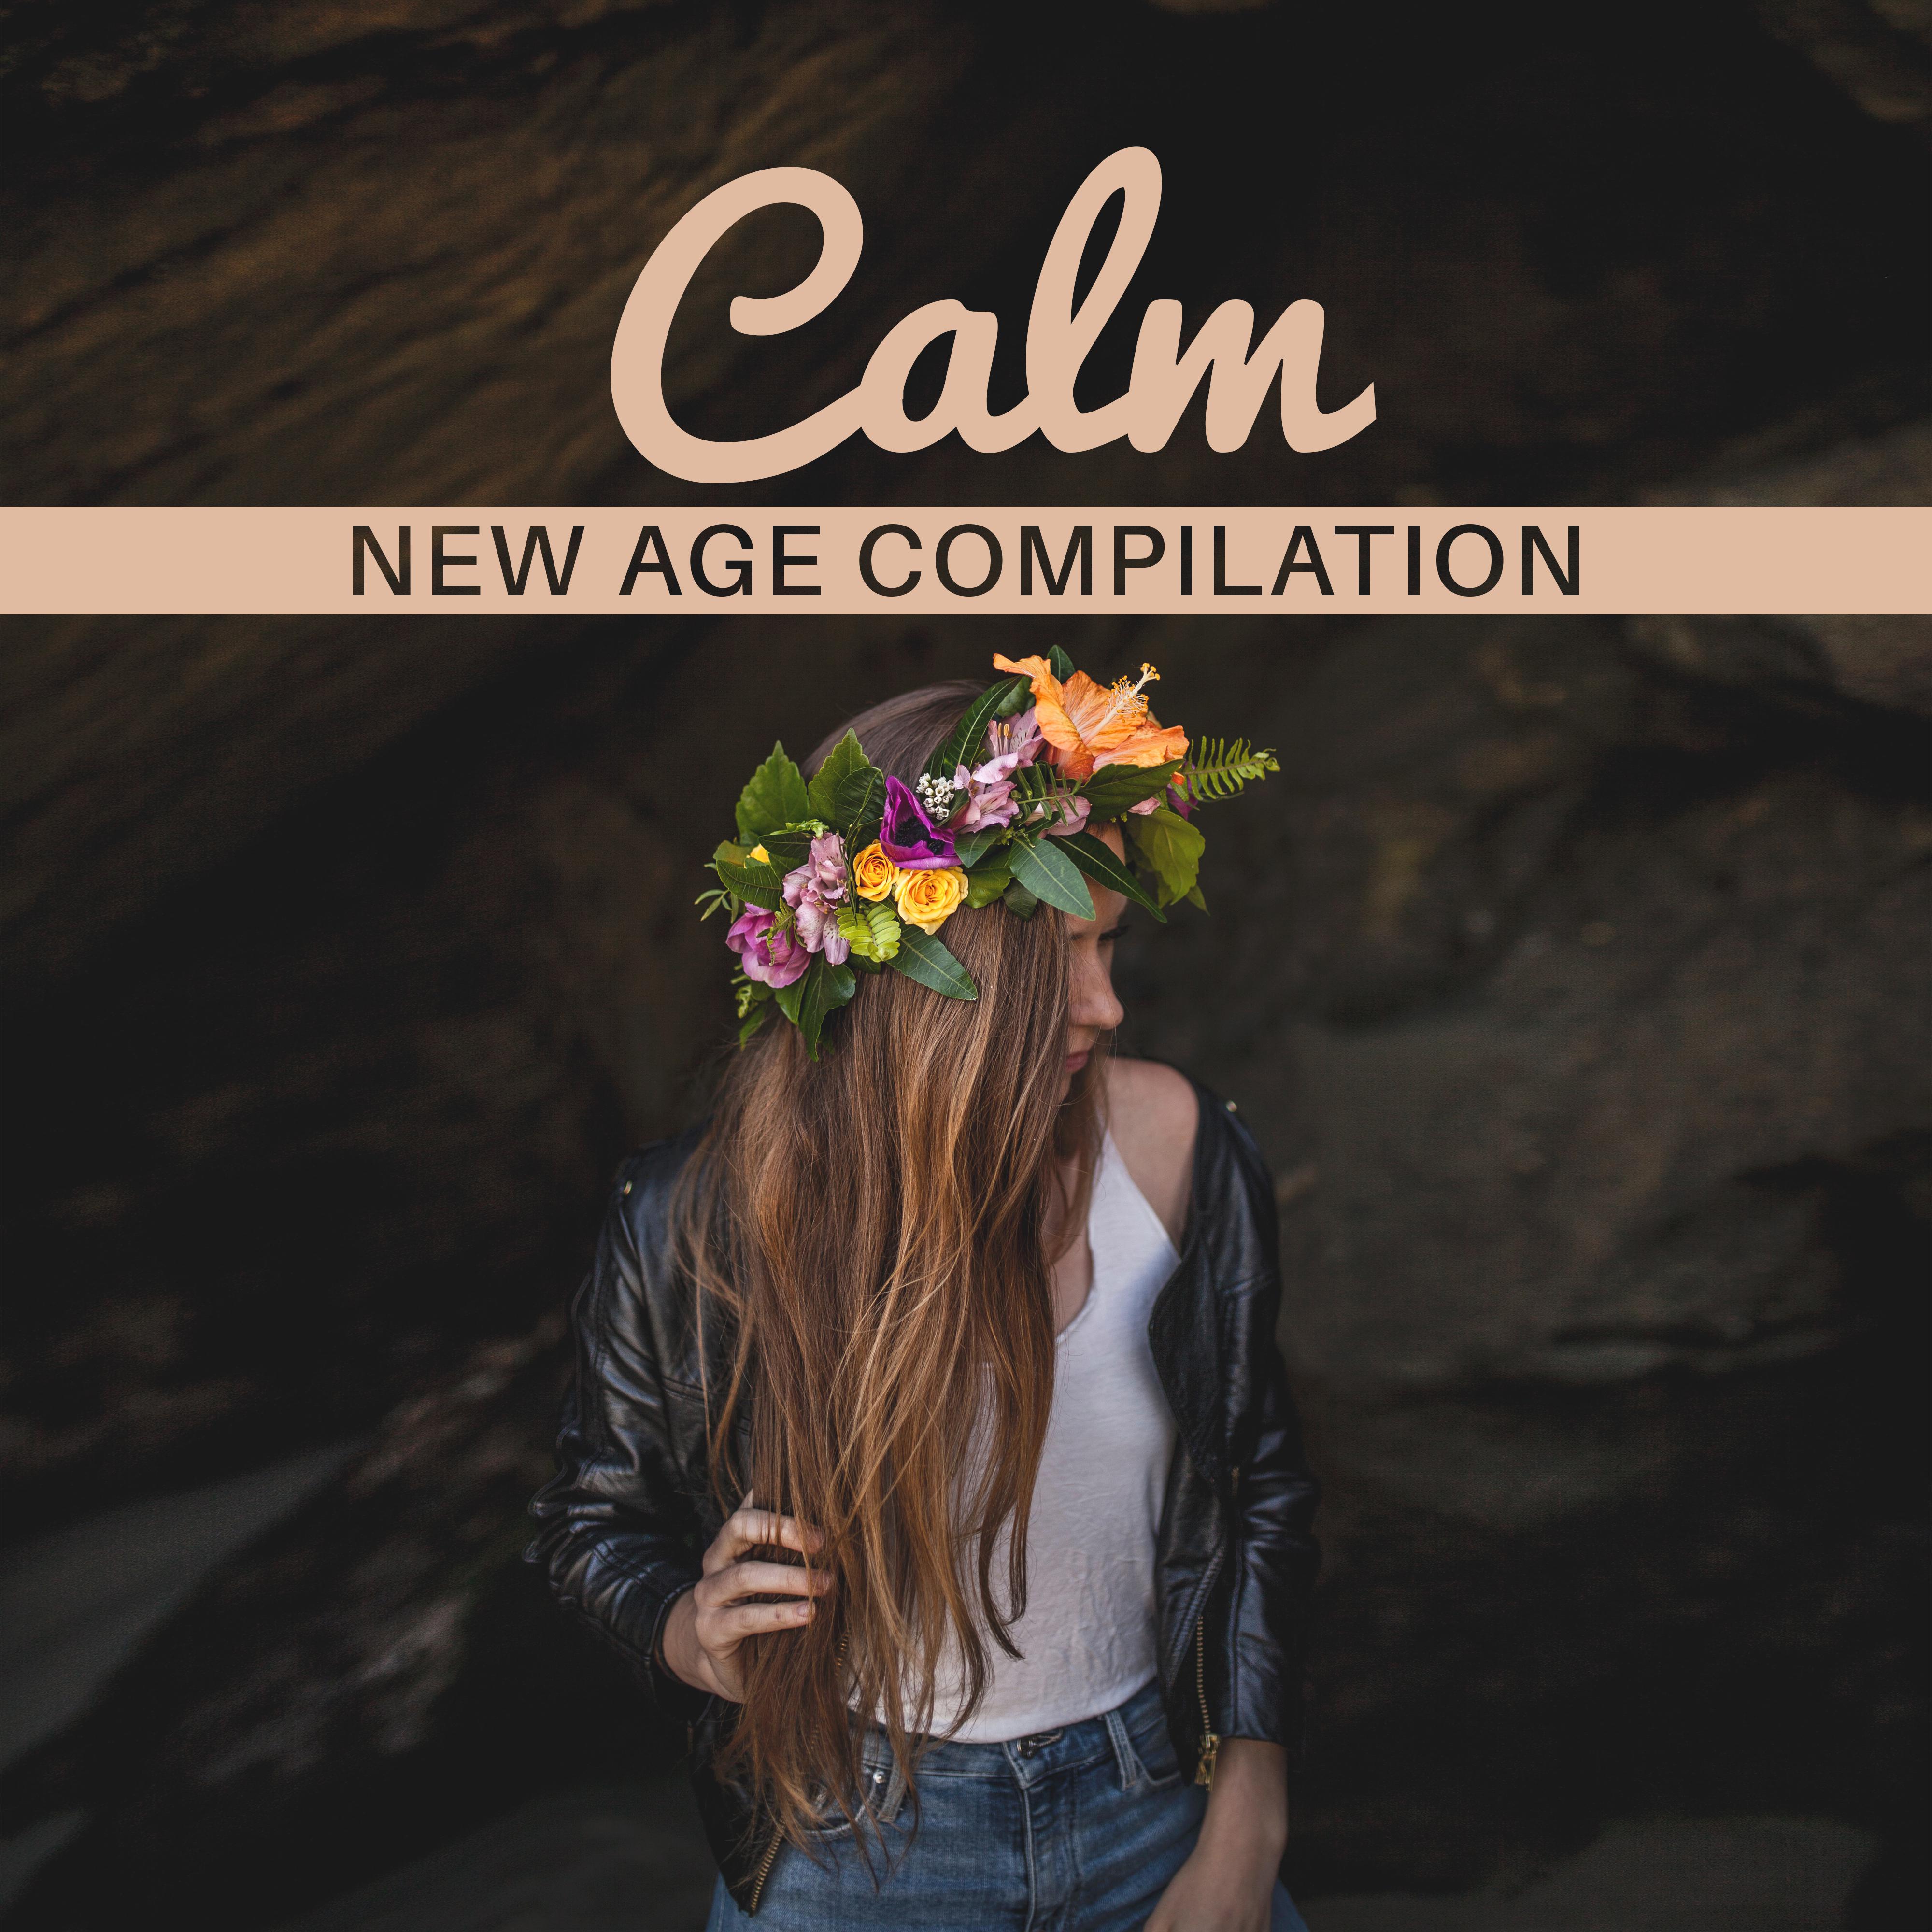 Calm New Age Compilation – Relaxing Music Therapy, Sounds of Nature, Healing Melodies